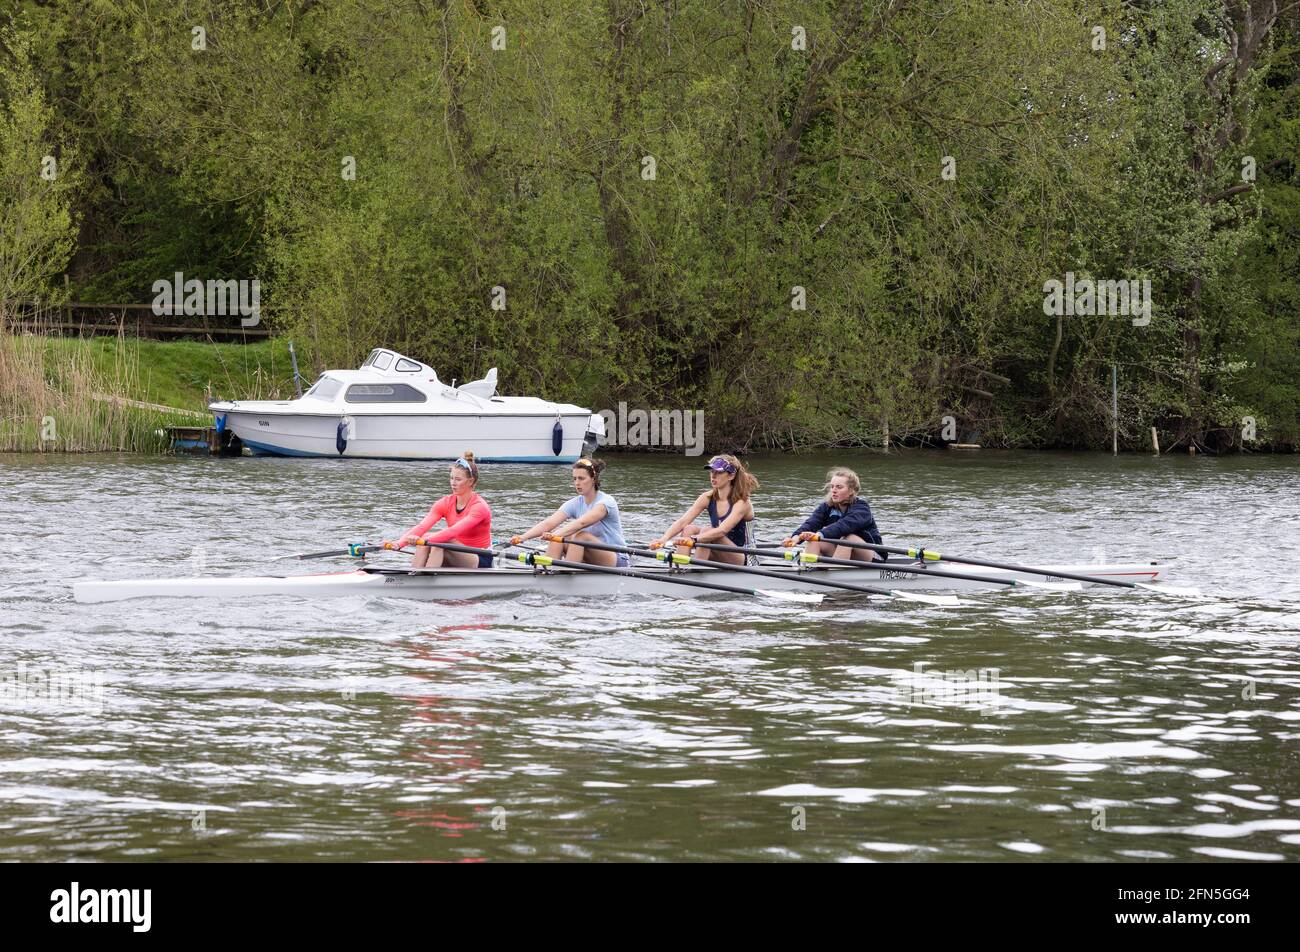 Women rowing UK; A womens' coxless four rowing on the river Thames at Wallingford, Oxfordshire UK Stock Photo